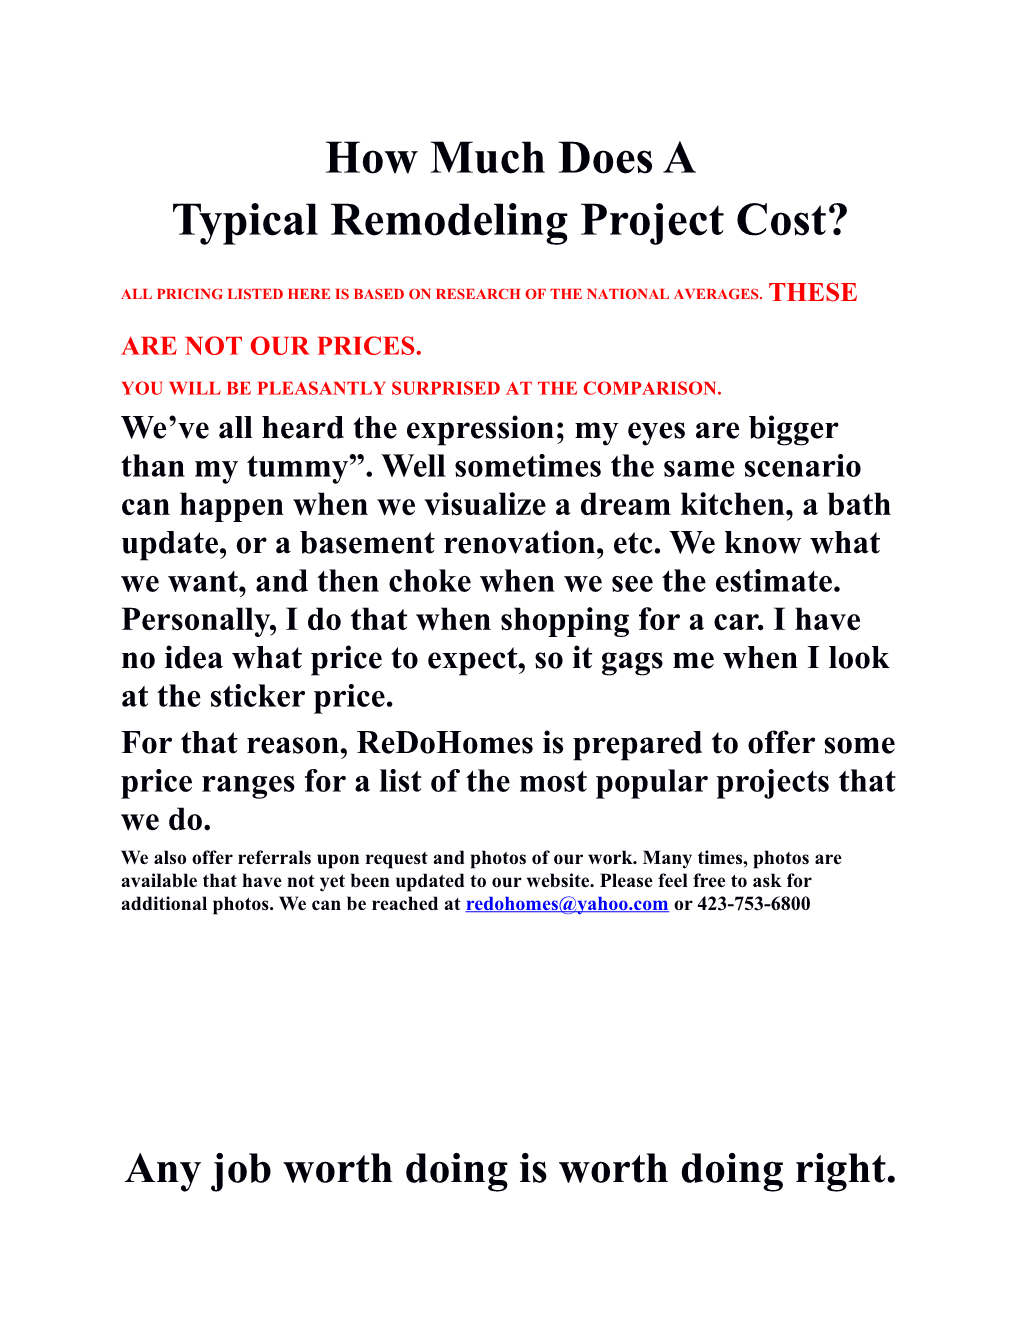 Typical Remodeling Project Cost?